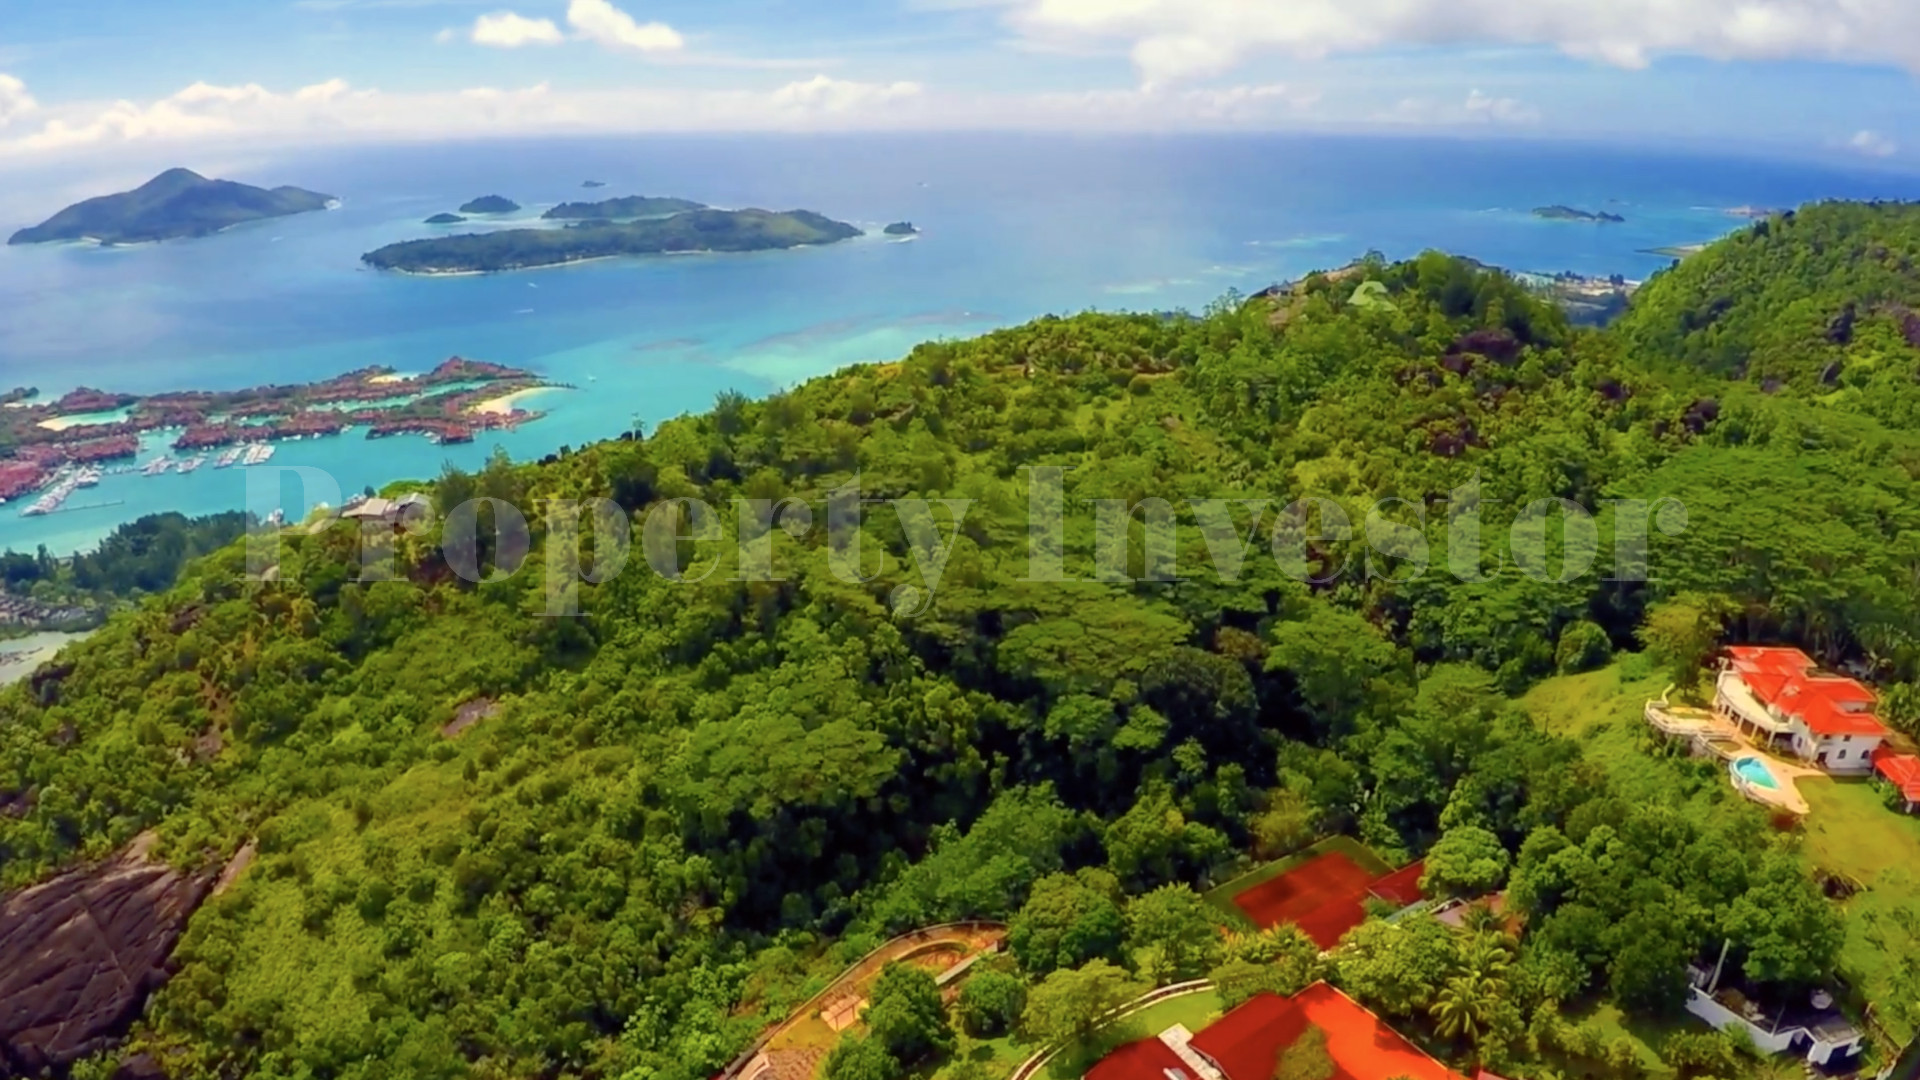 5.46 Hectare Mountaintop Land for Private or Residential Development with Unbeatable 360° Sea & Mountain Views for Sale in Mahé, Seychelles